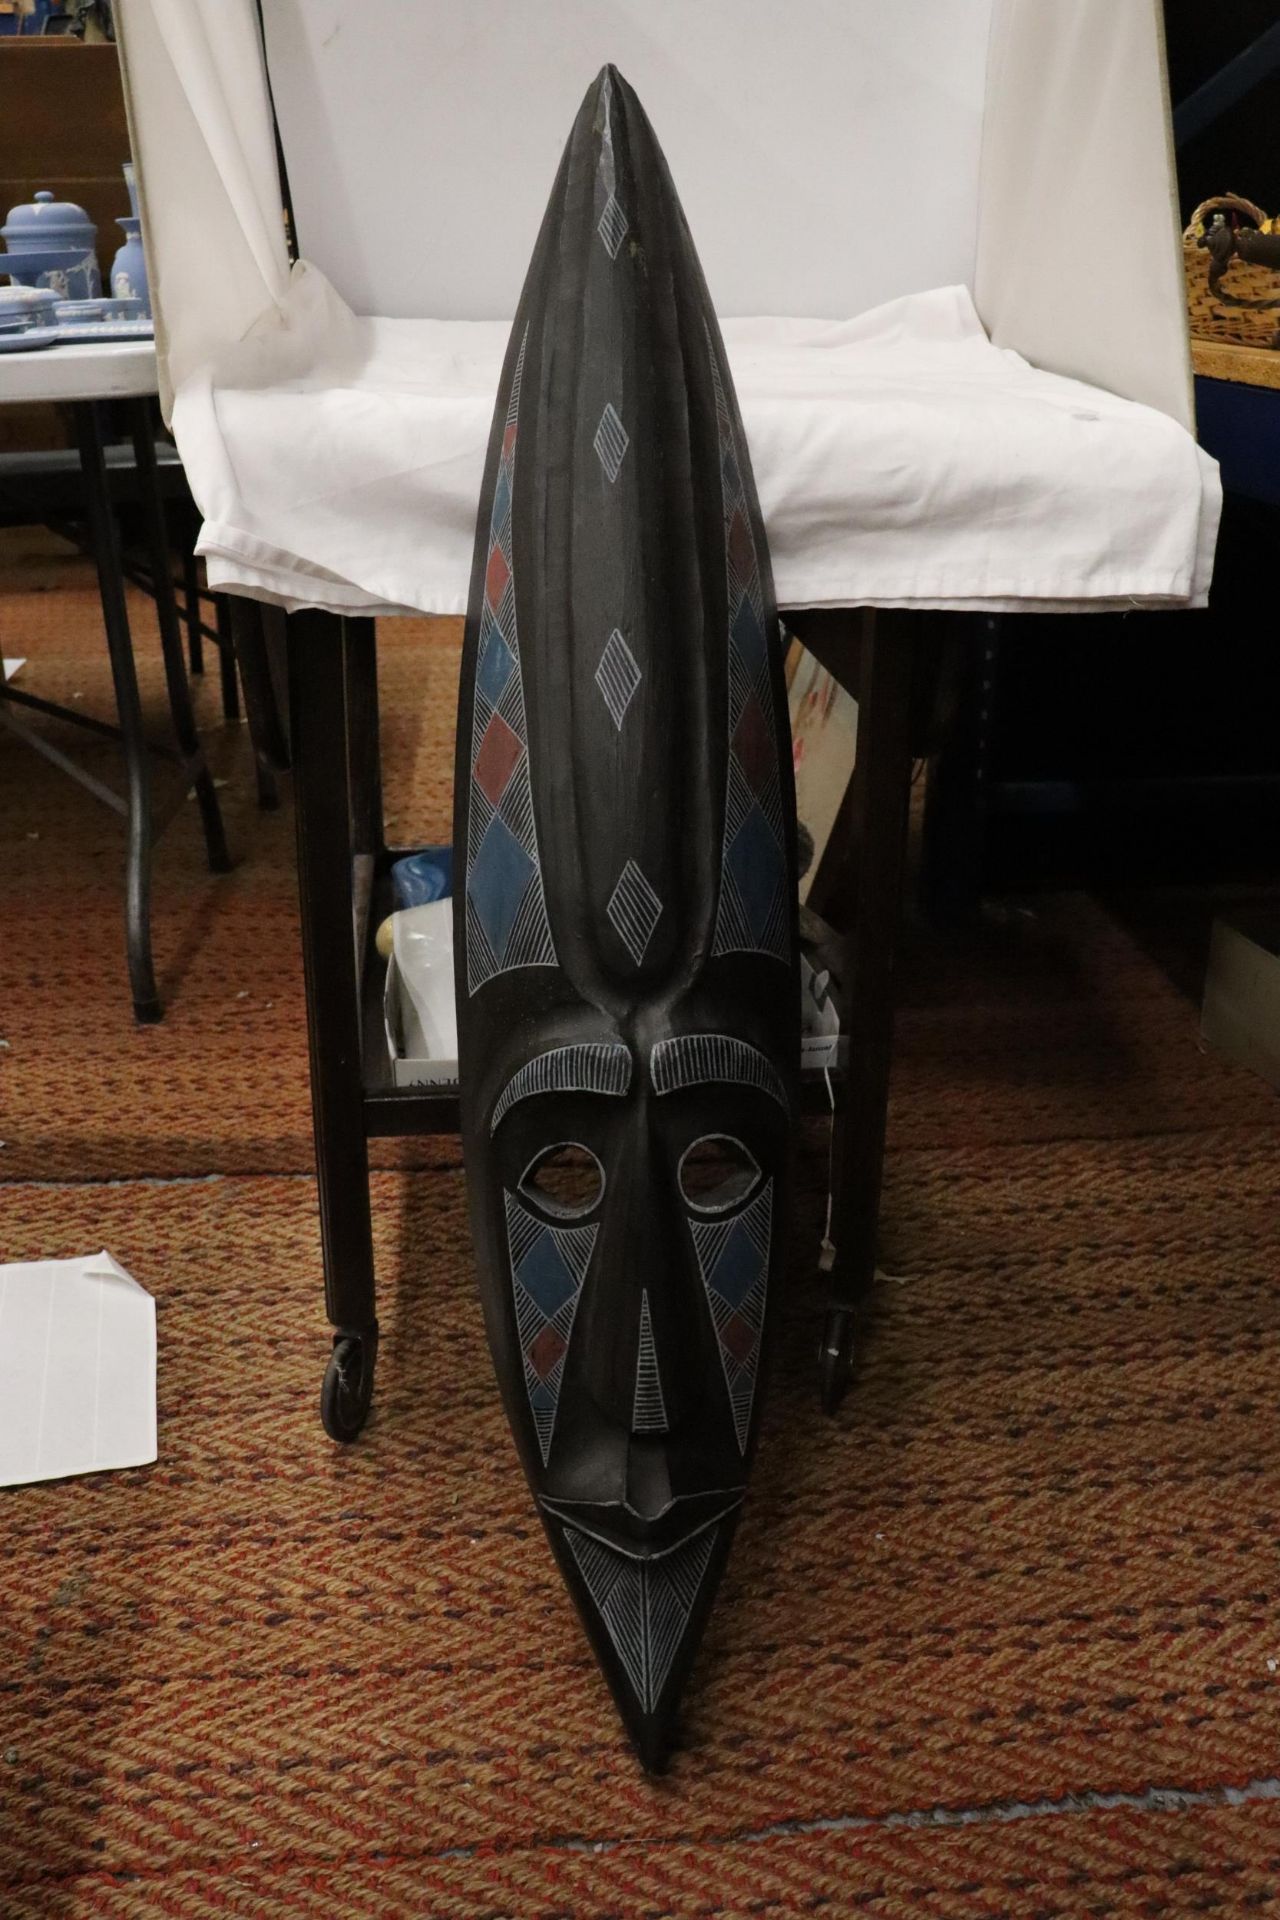 A LARGE AFRICAN ETHNIC WOODEN MASK, LENGTH 1 METRE